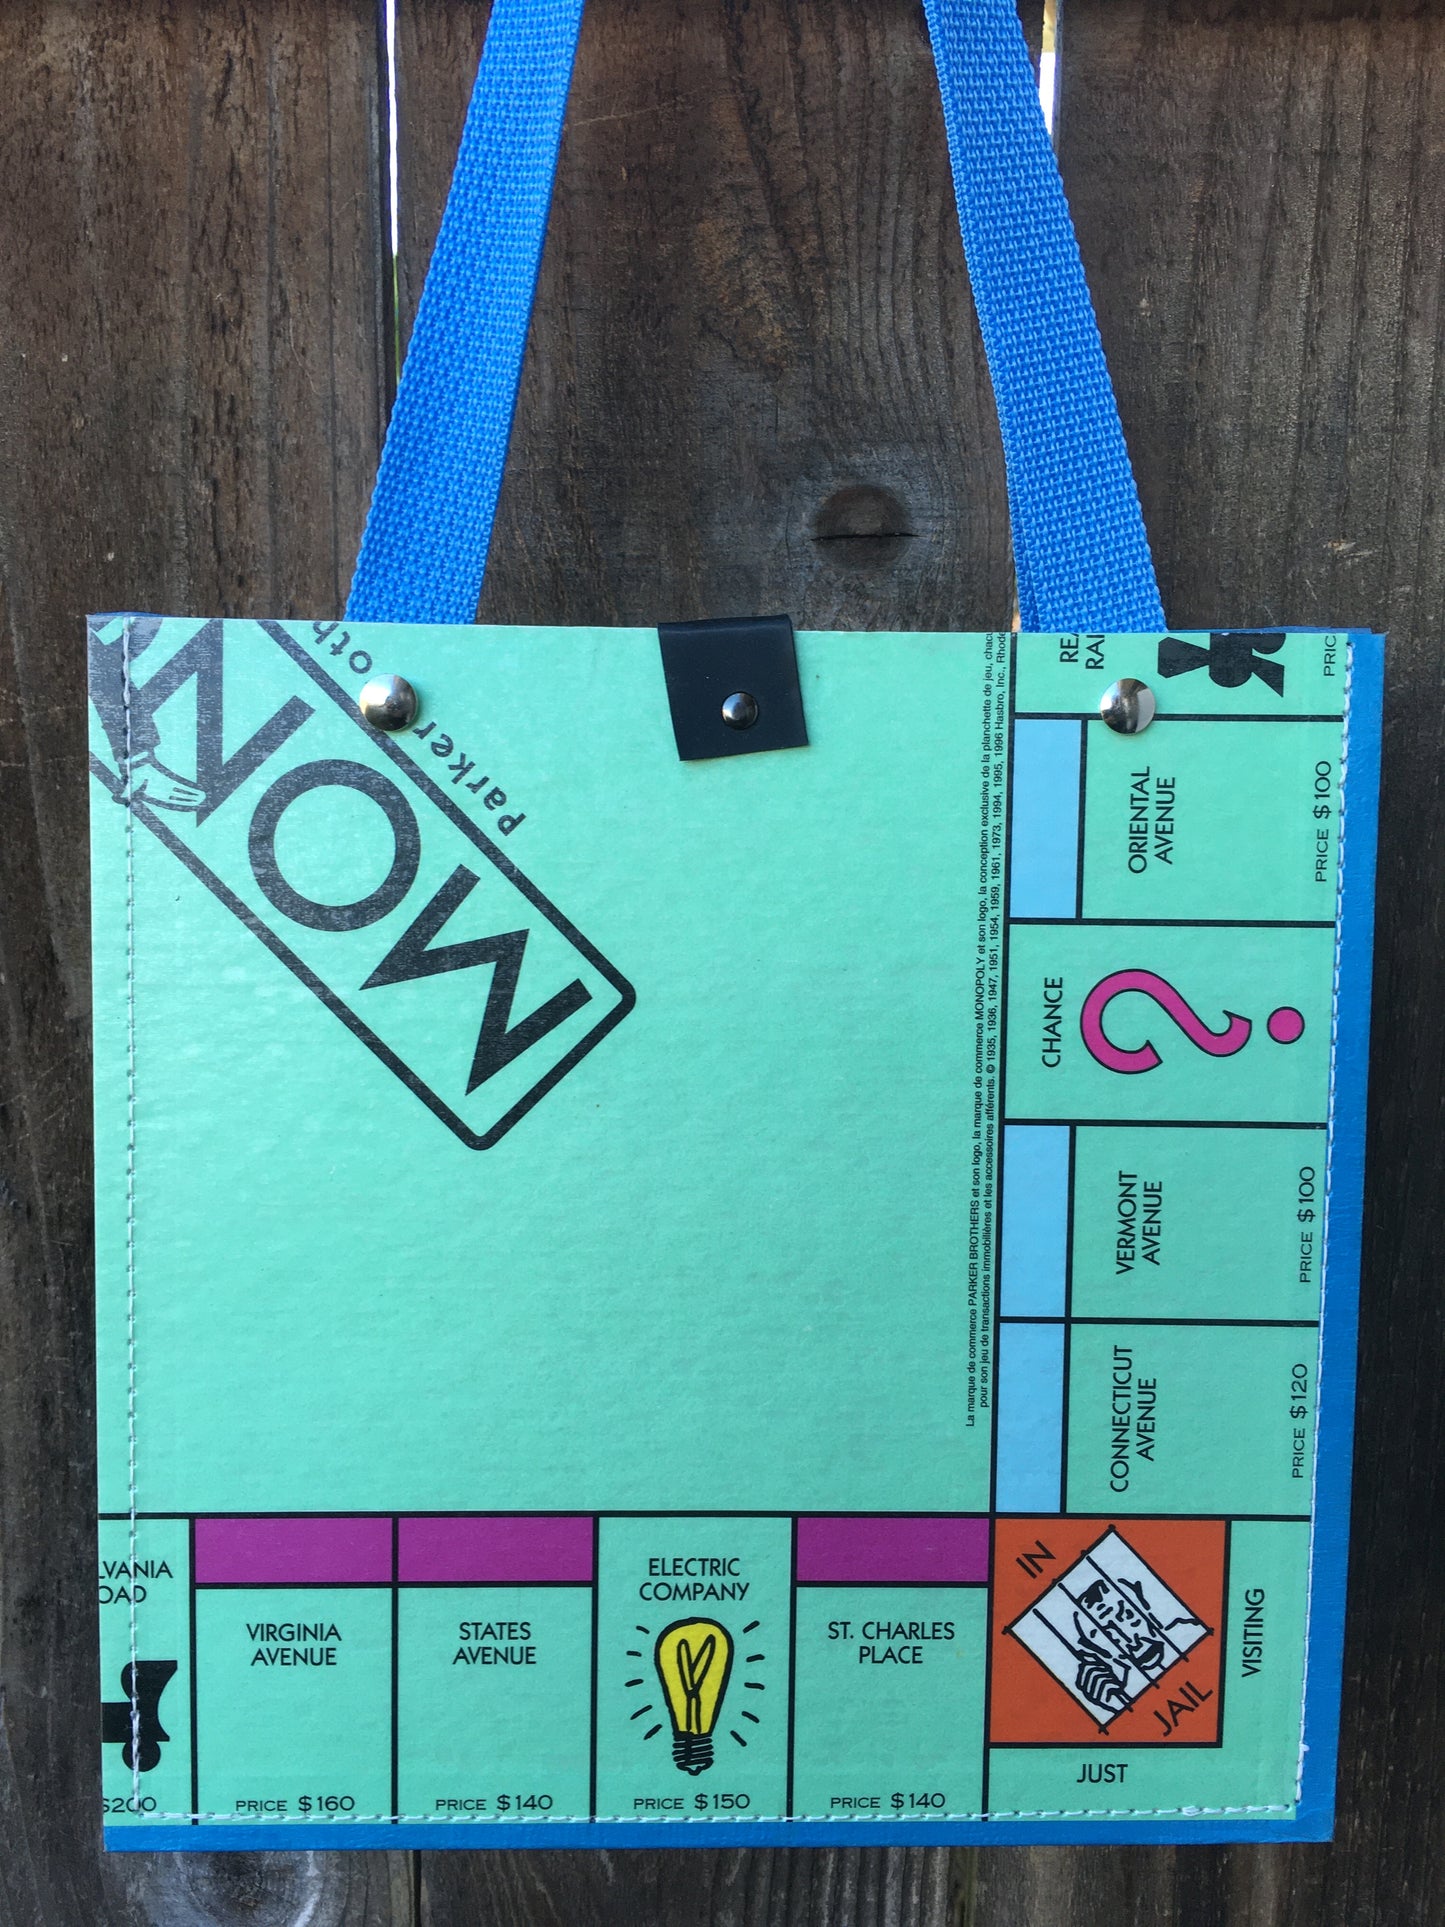 Gameboard Bag - Monopoly